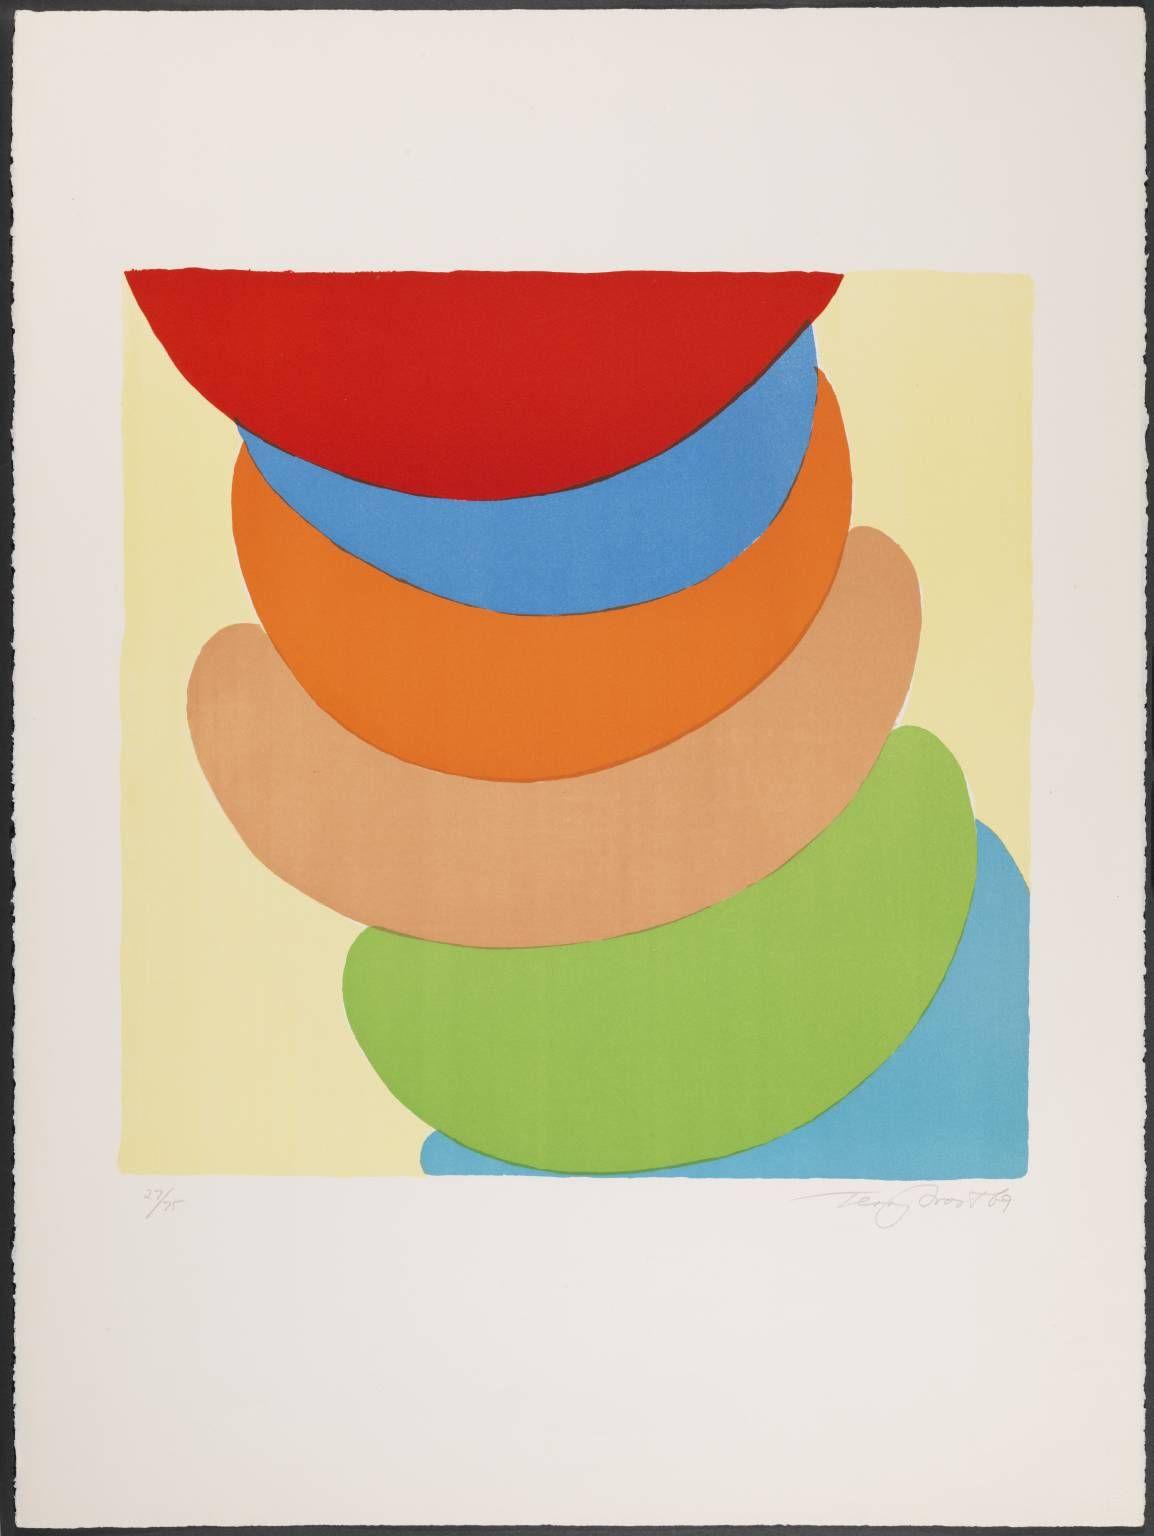 Red Blue Orange Logo - Red, Blue, Orange on Yellow', Sir Terry Frost, 1969